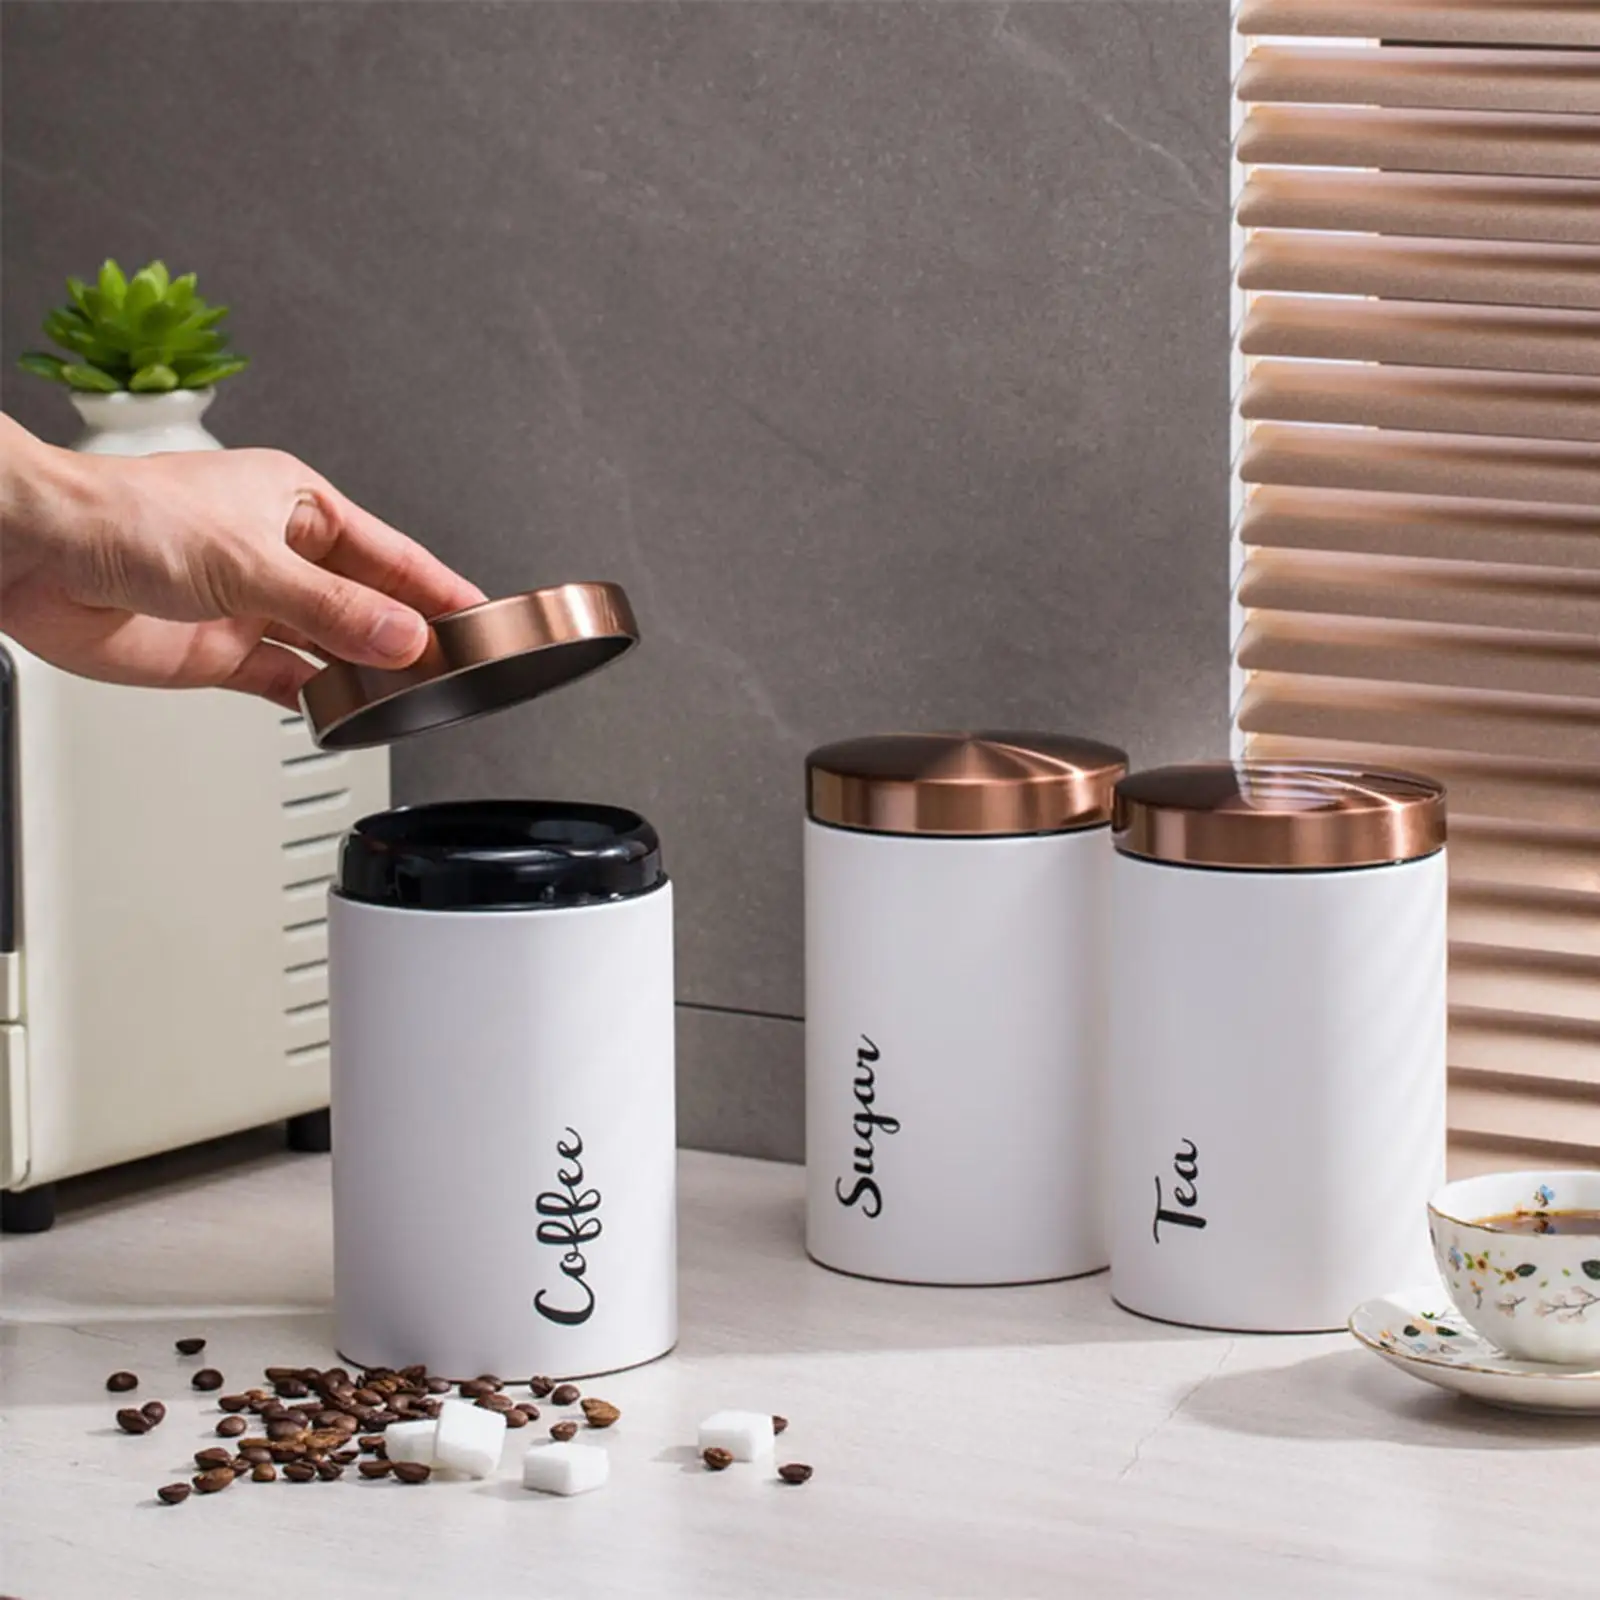 3x Stainless Steel Storage Jars Ornament Dustproof Containers Organizer for Living Room Desk Cabinet Pantry Closet